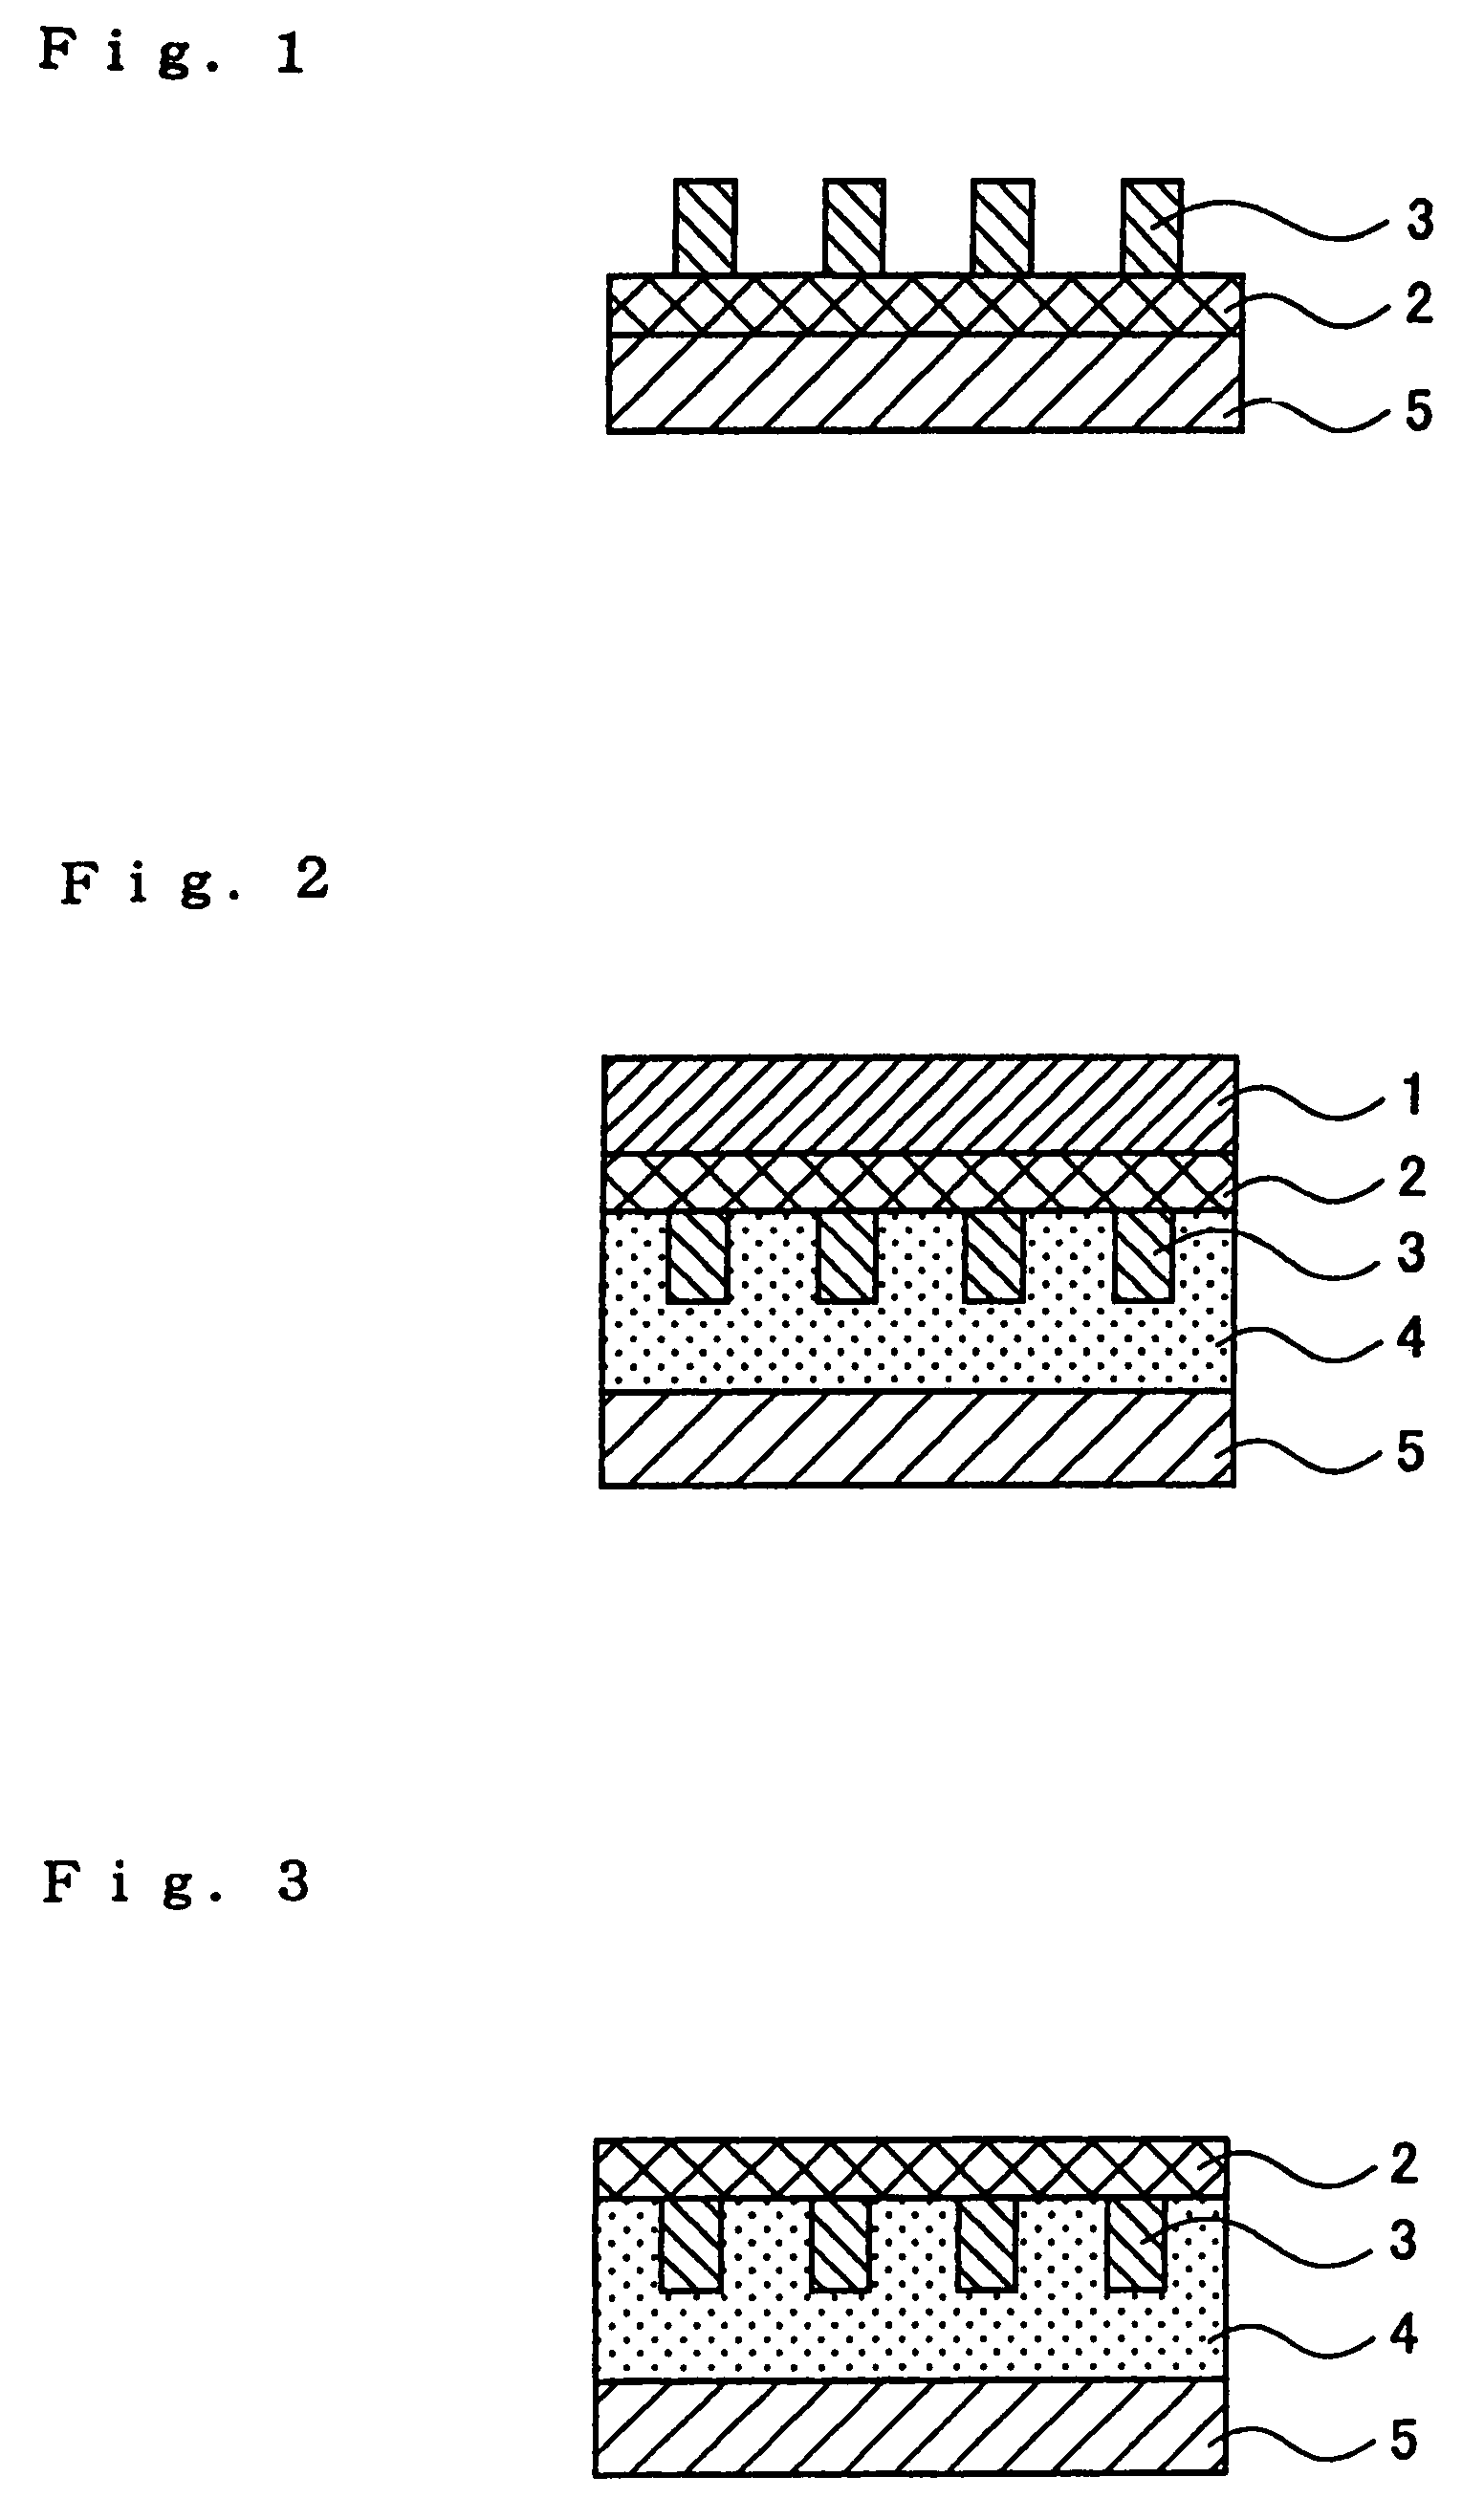 Transparent conductive multi-layer structure, process for its manufacture and device making use of transparent conductive multi-layer structure